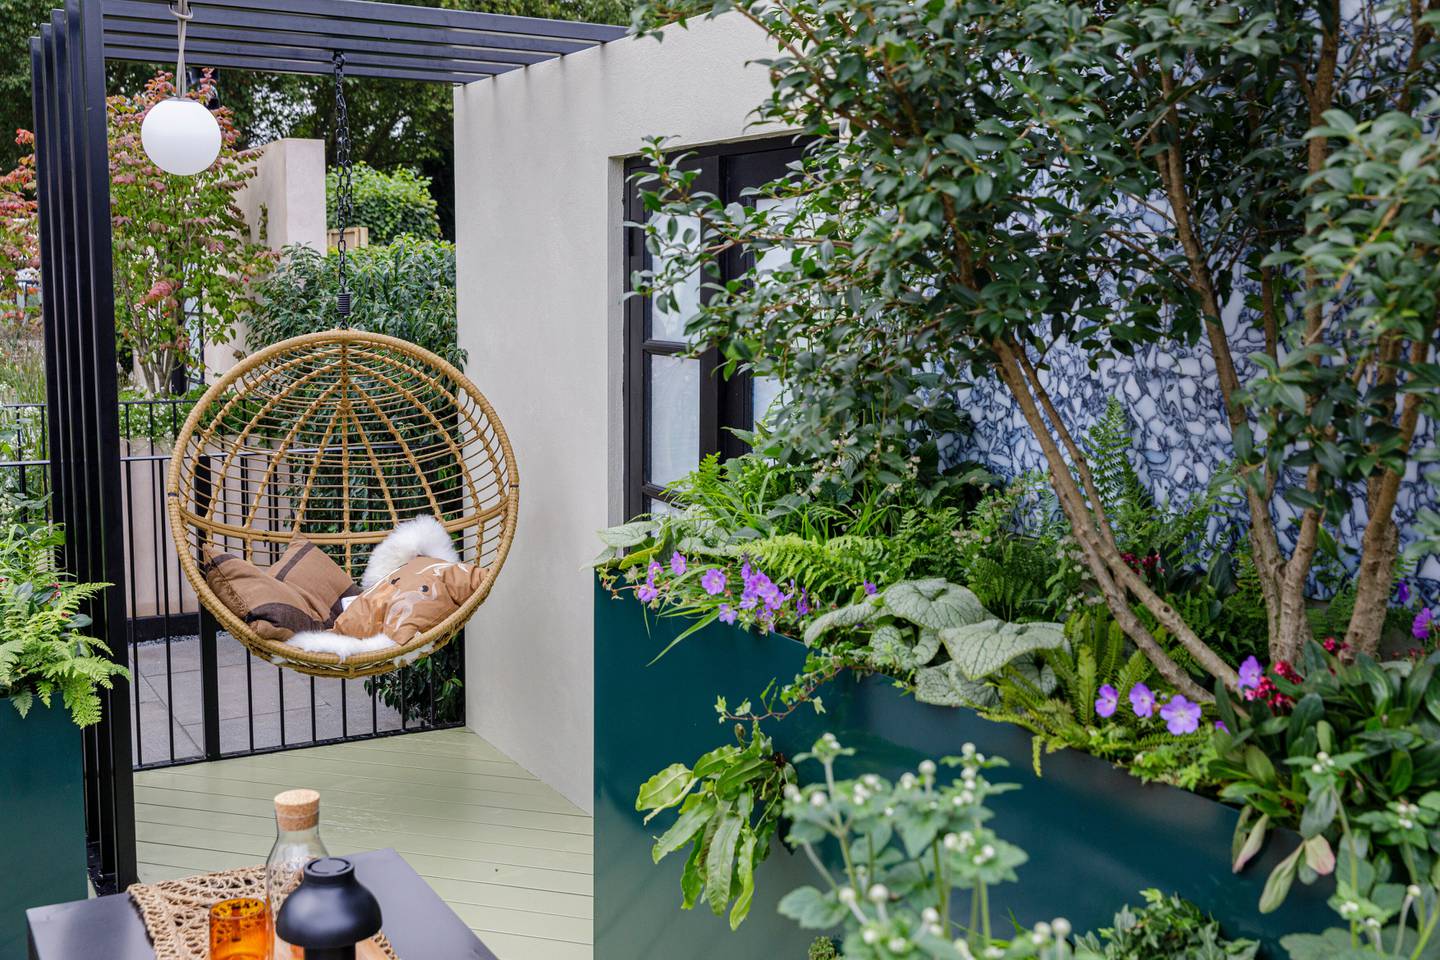 Sky Sanctuary by Michael Coley for the Balcony Garden category. Photo: RHS